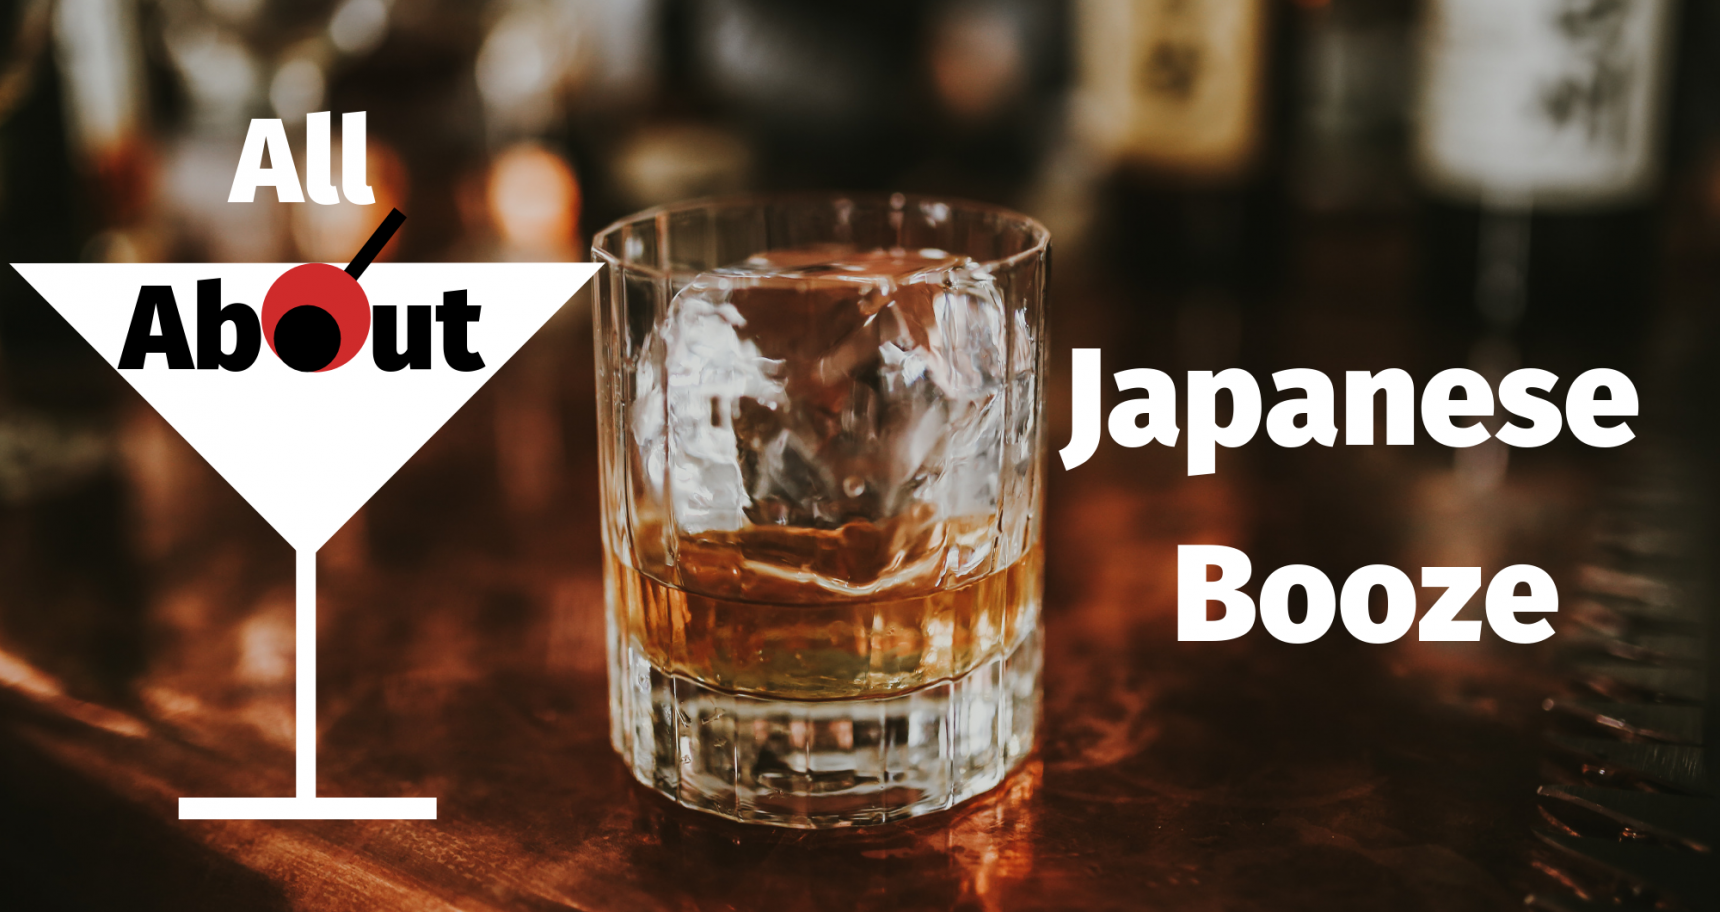 All About Japanese Booze